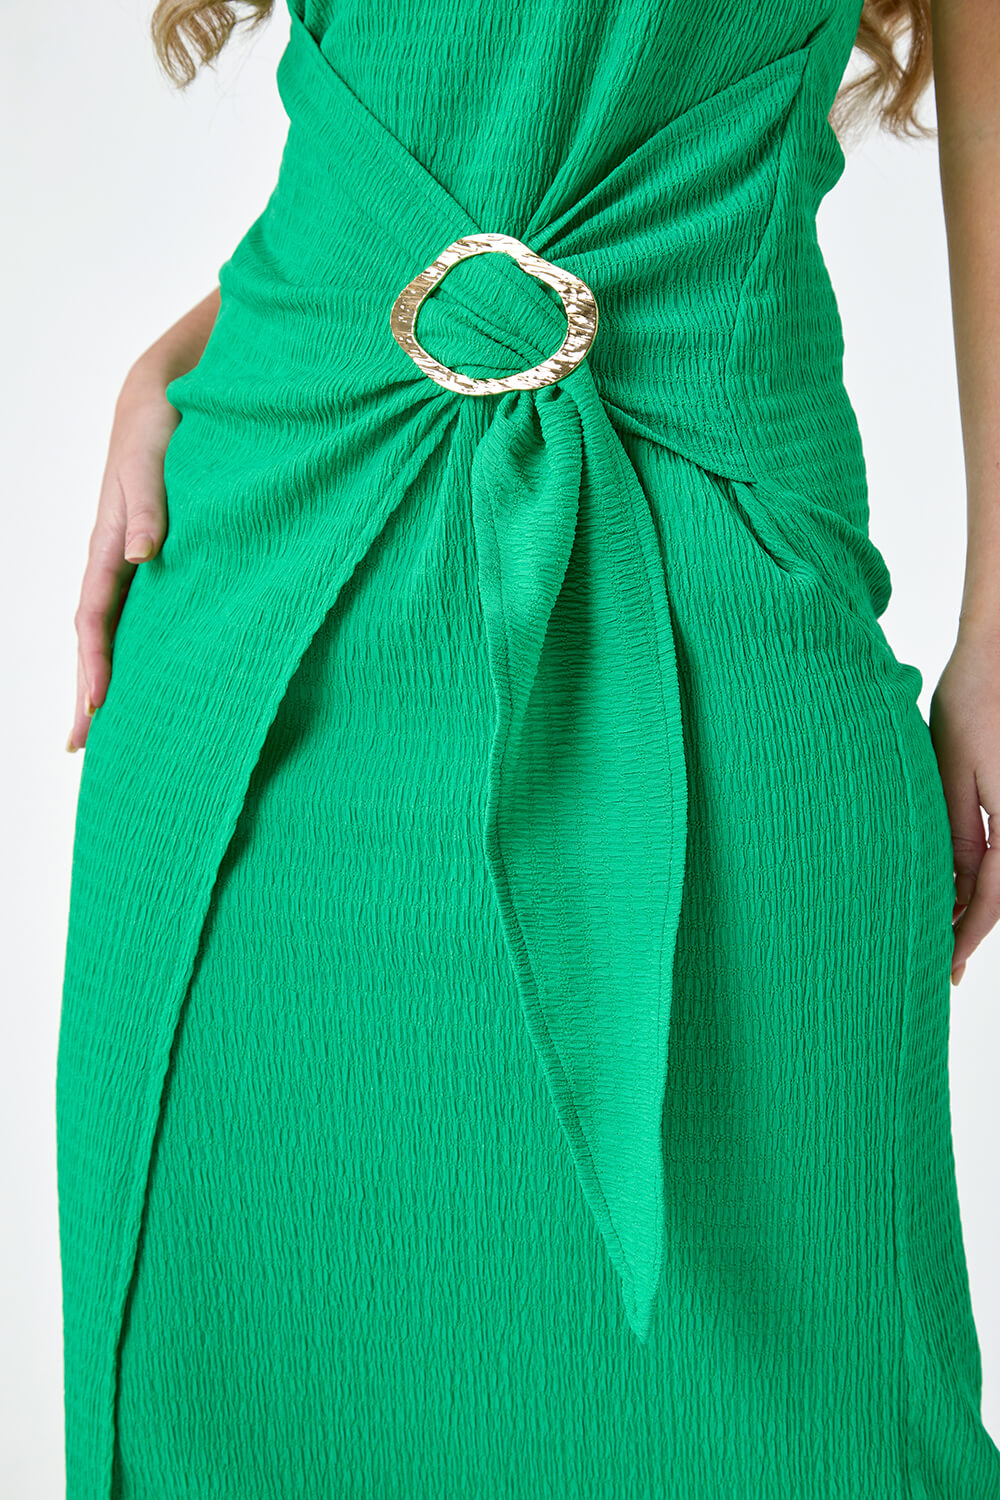 Green Petite Textured Buckle Wrap Dress, Image 5 of 5